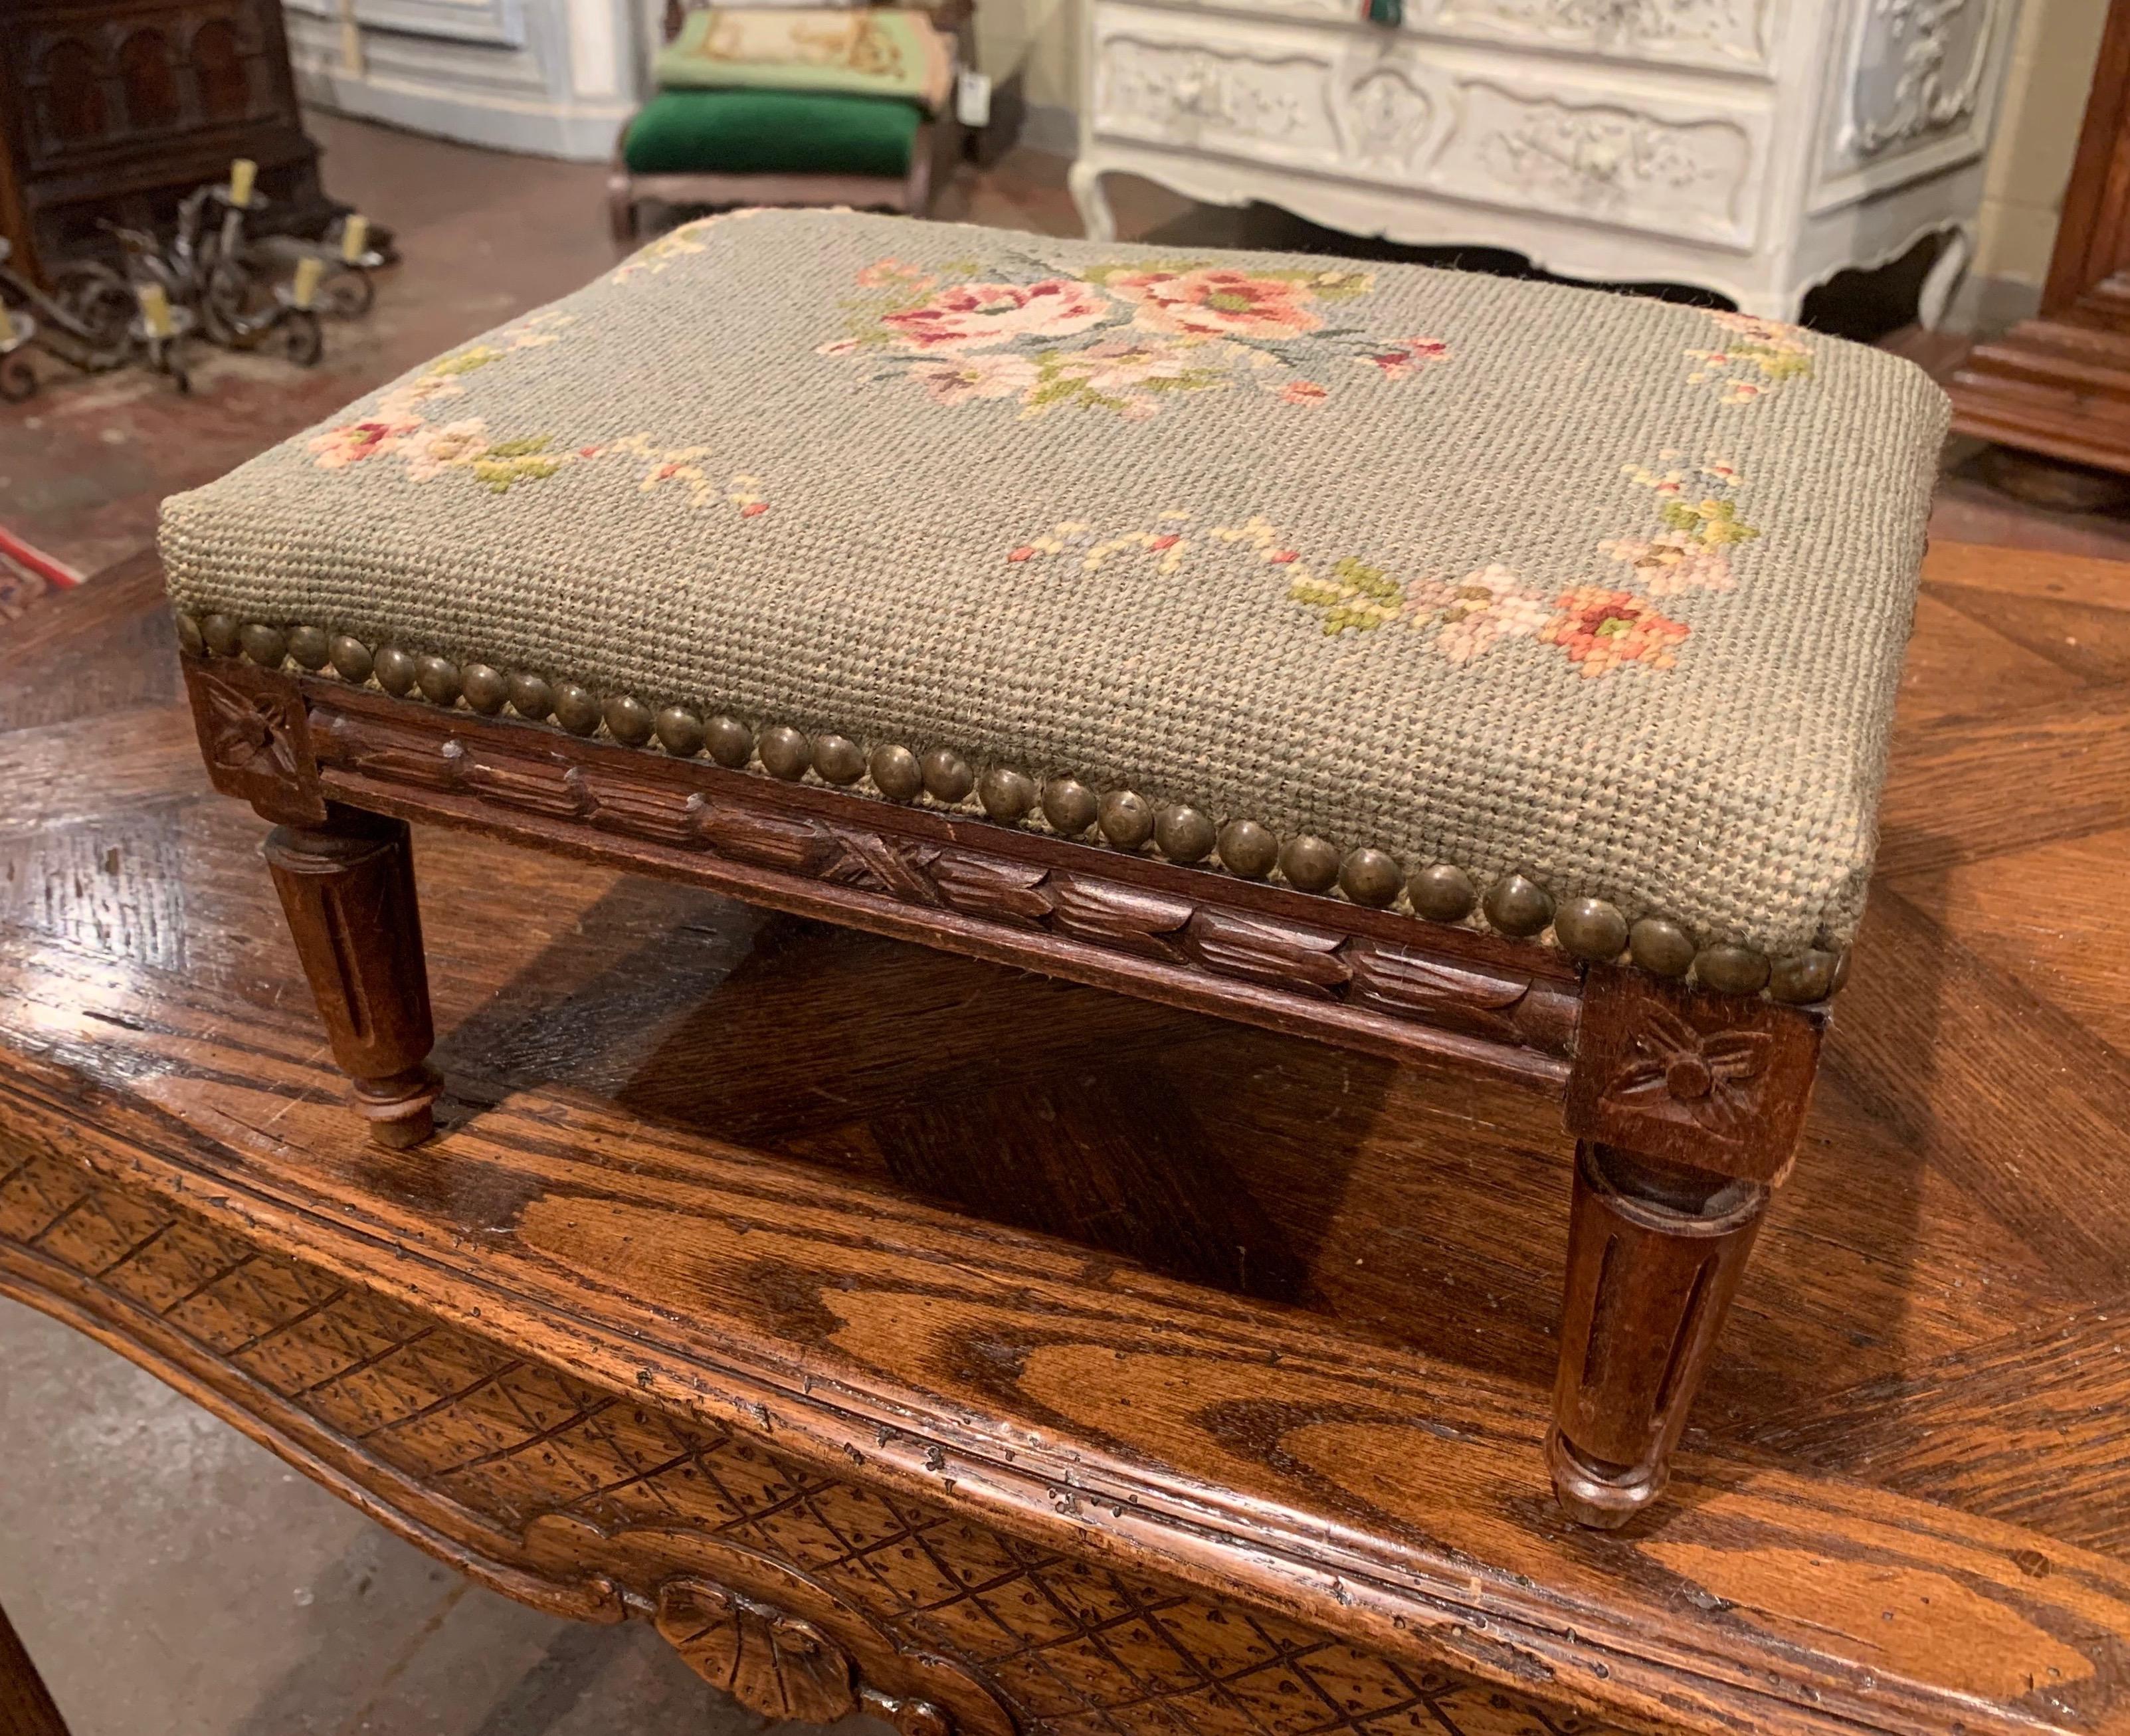 Put your feet up with style and comfort with this elegant Louis XVI foot stool. Crafted in France circa 1920 and rectangular in shape, the antique stool stands on tapered legs over a carved apron decorated with rosette medallions in each corner. The